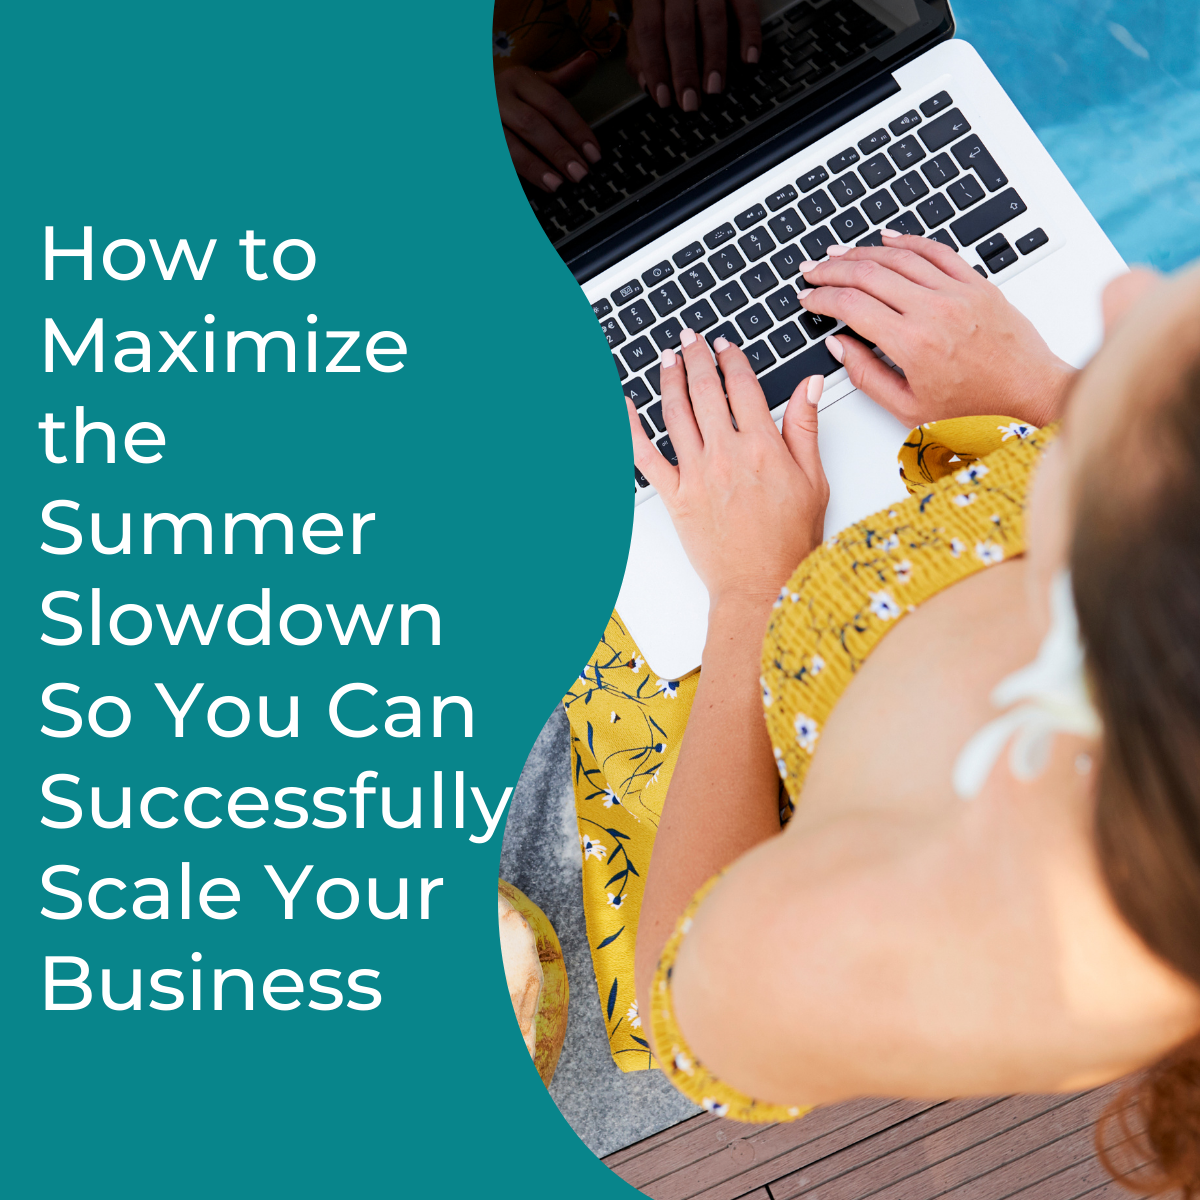 You are currently viewing How to Maximize the Summer Slowdown So You Can Successfully Scale Your Business